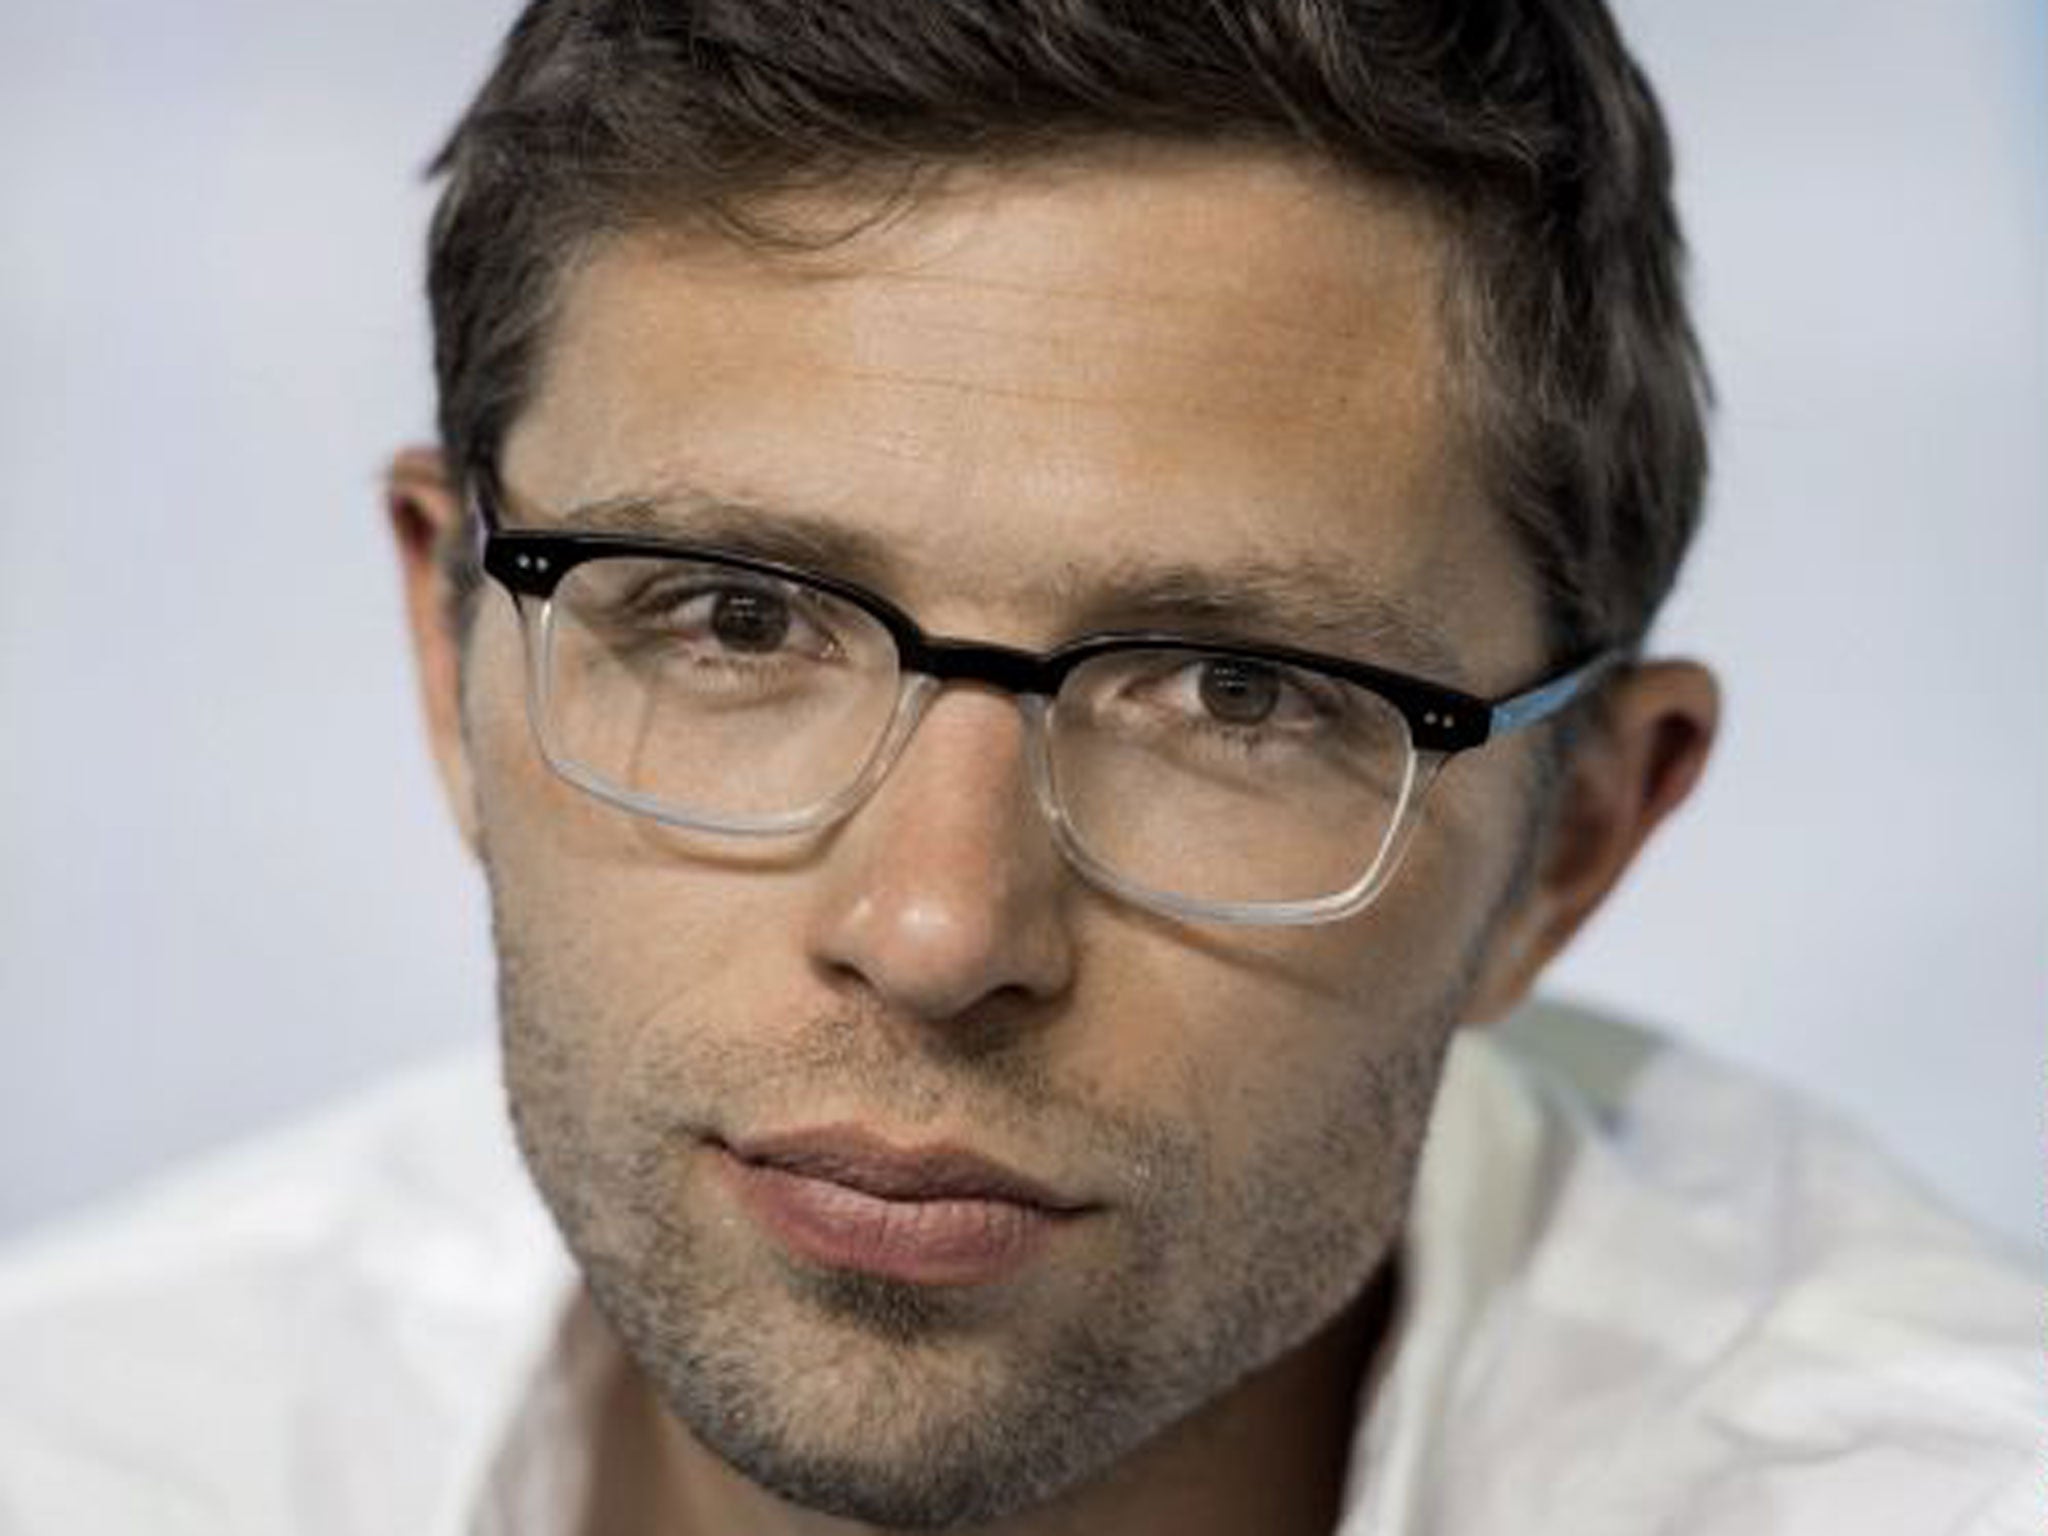 Jonah Lehrer: The writer resigned from The New Yorker after being exposed